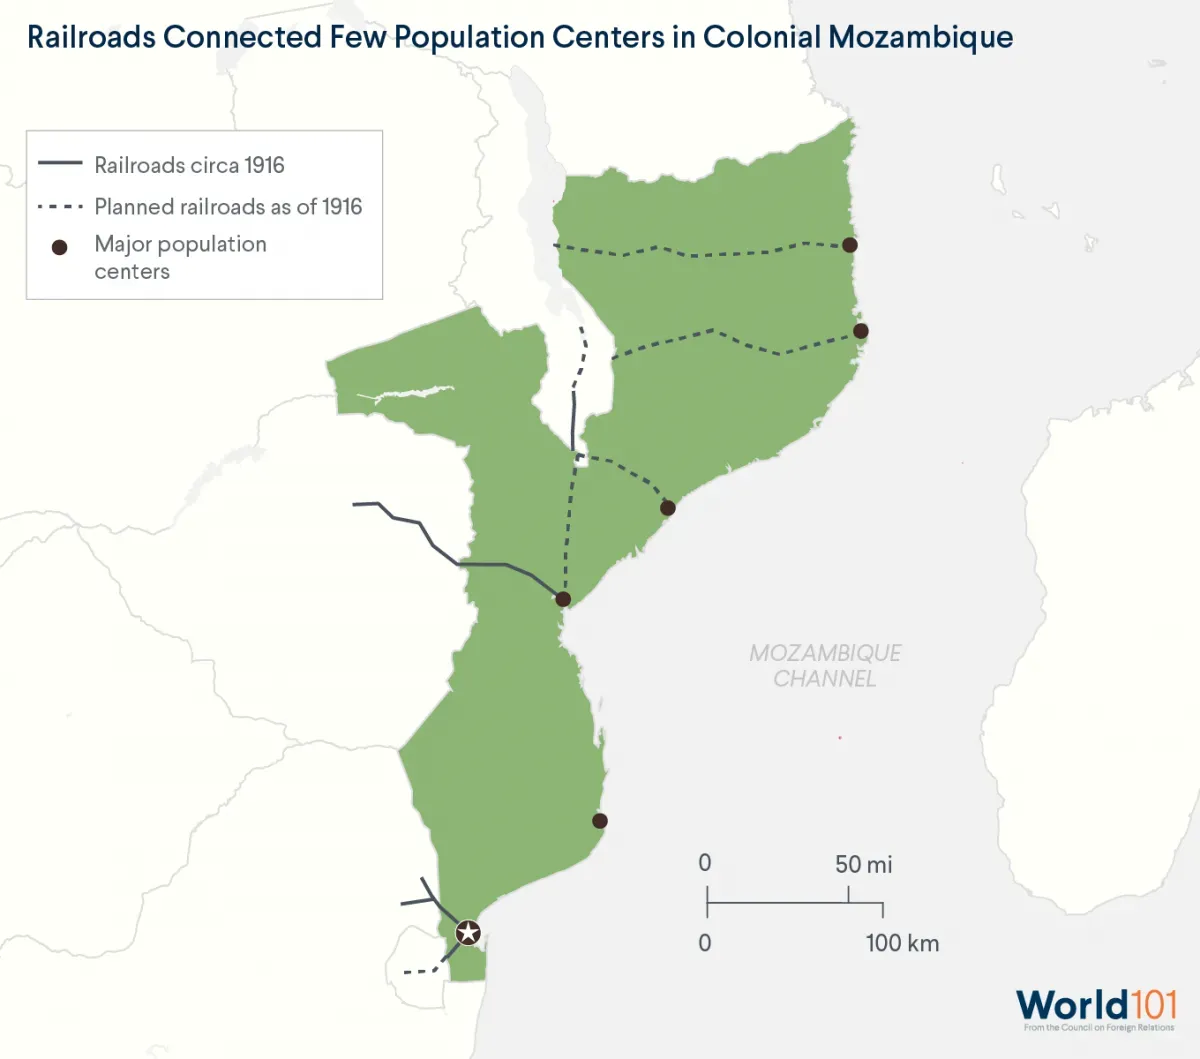 Map showing how the railroads in colonial Mozambique didn't really connect major population centers, but rather connected the resource-rich interior with the coasts. For more info contact us at world101@cfr.org.